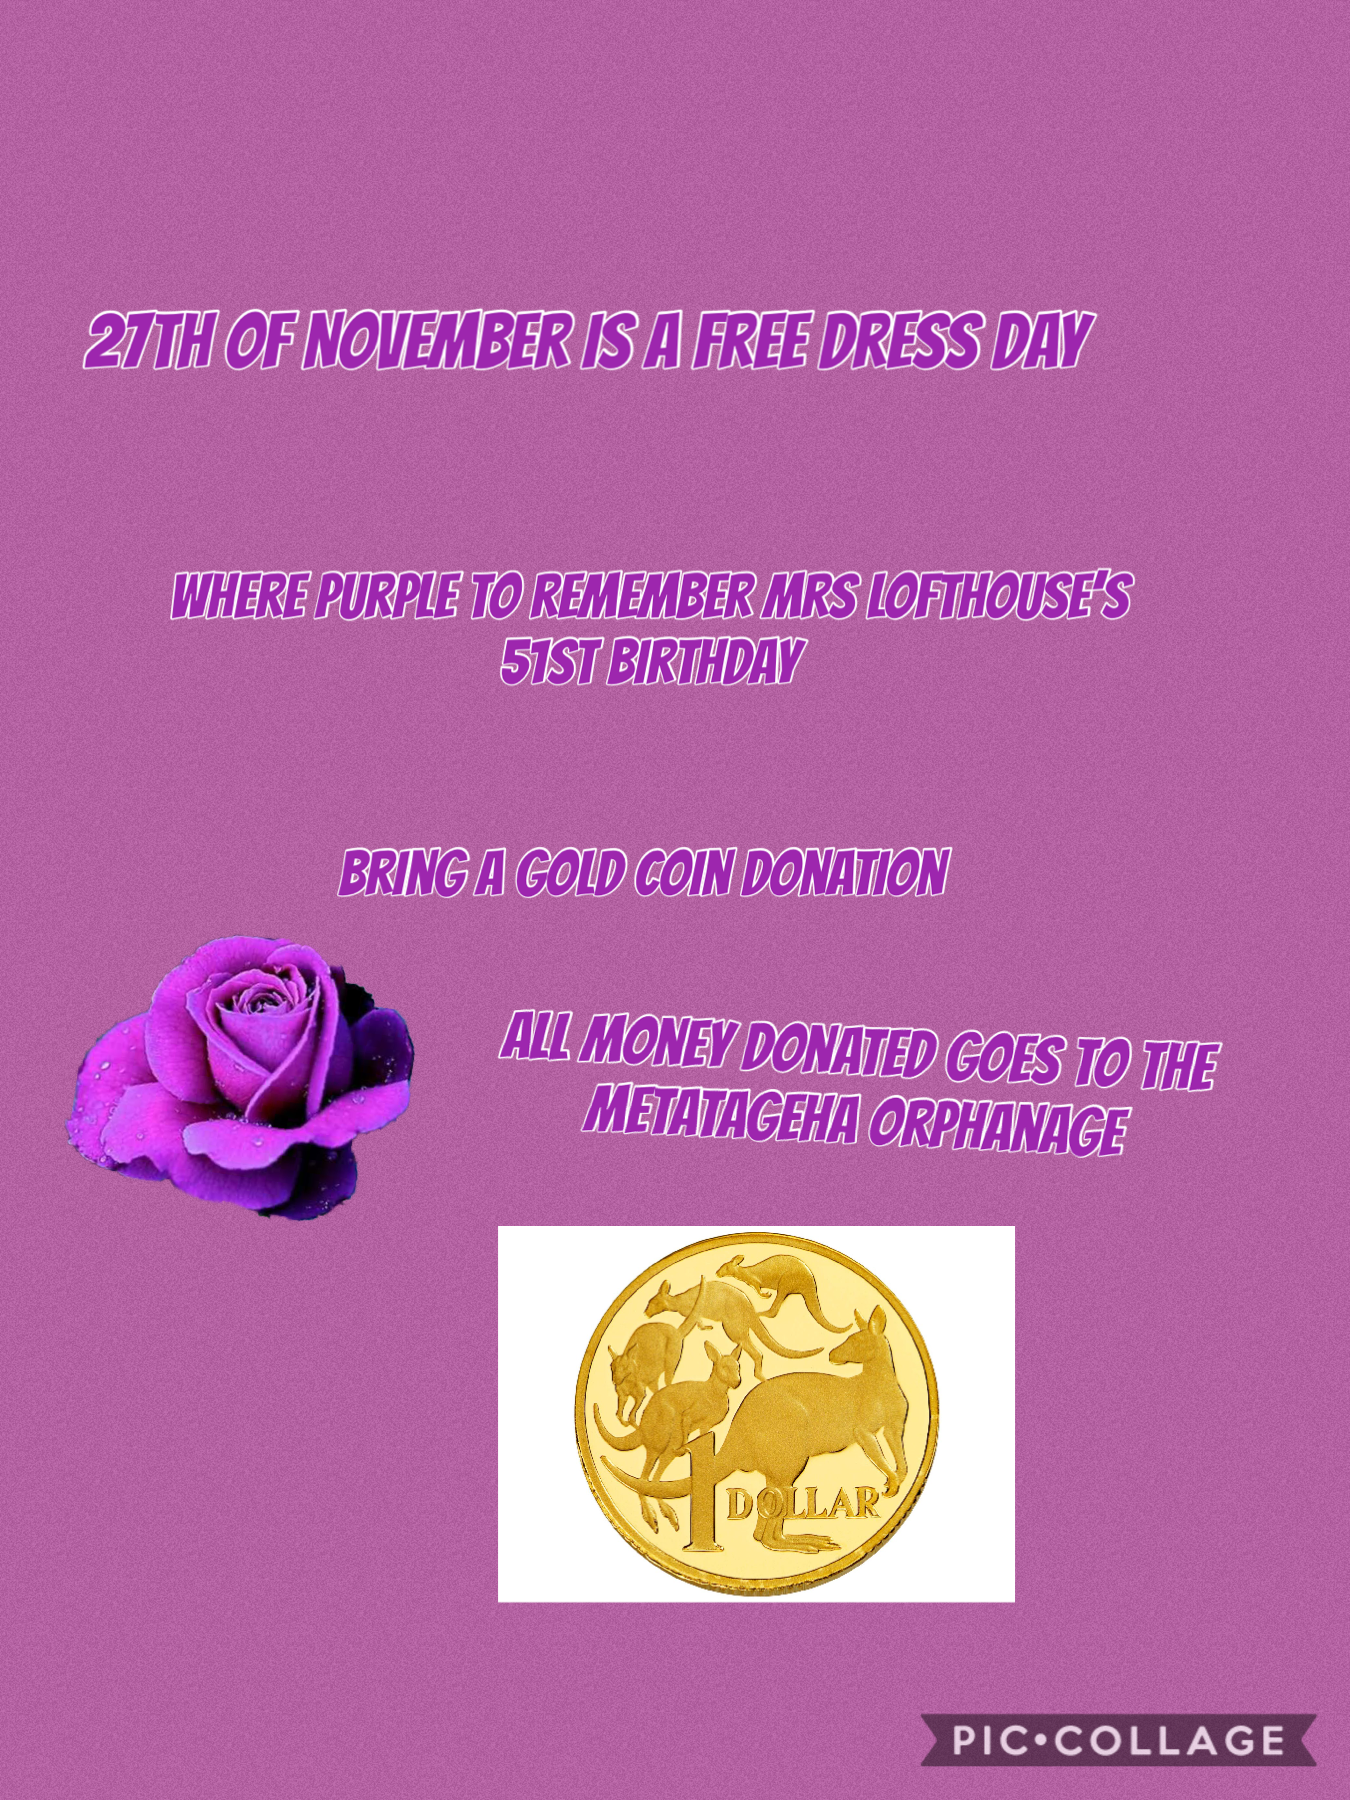 Dress in Purple on Wednesday, 27th November